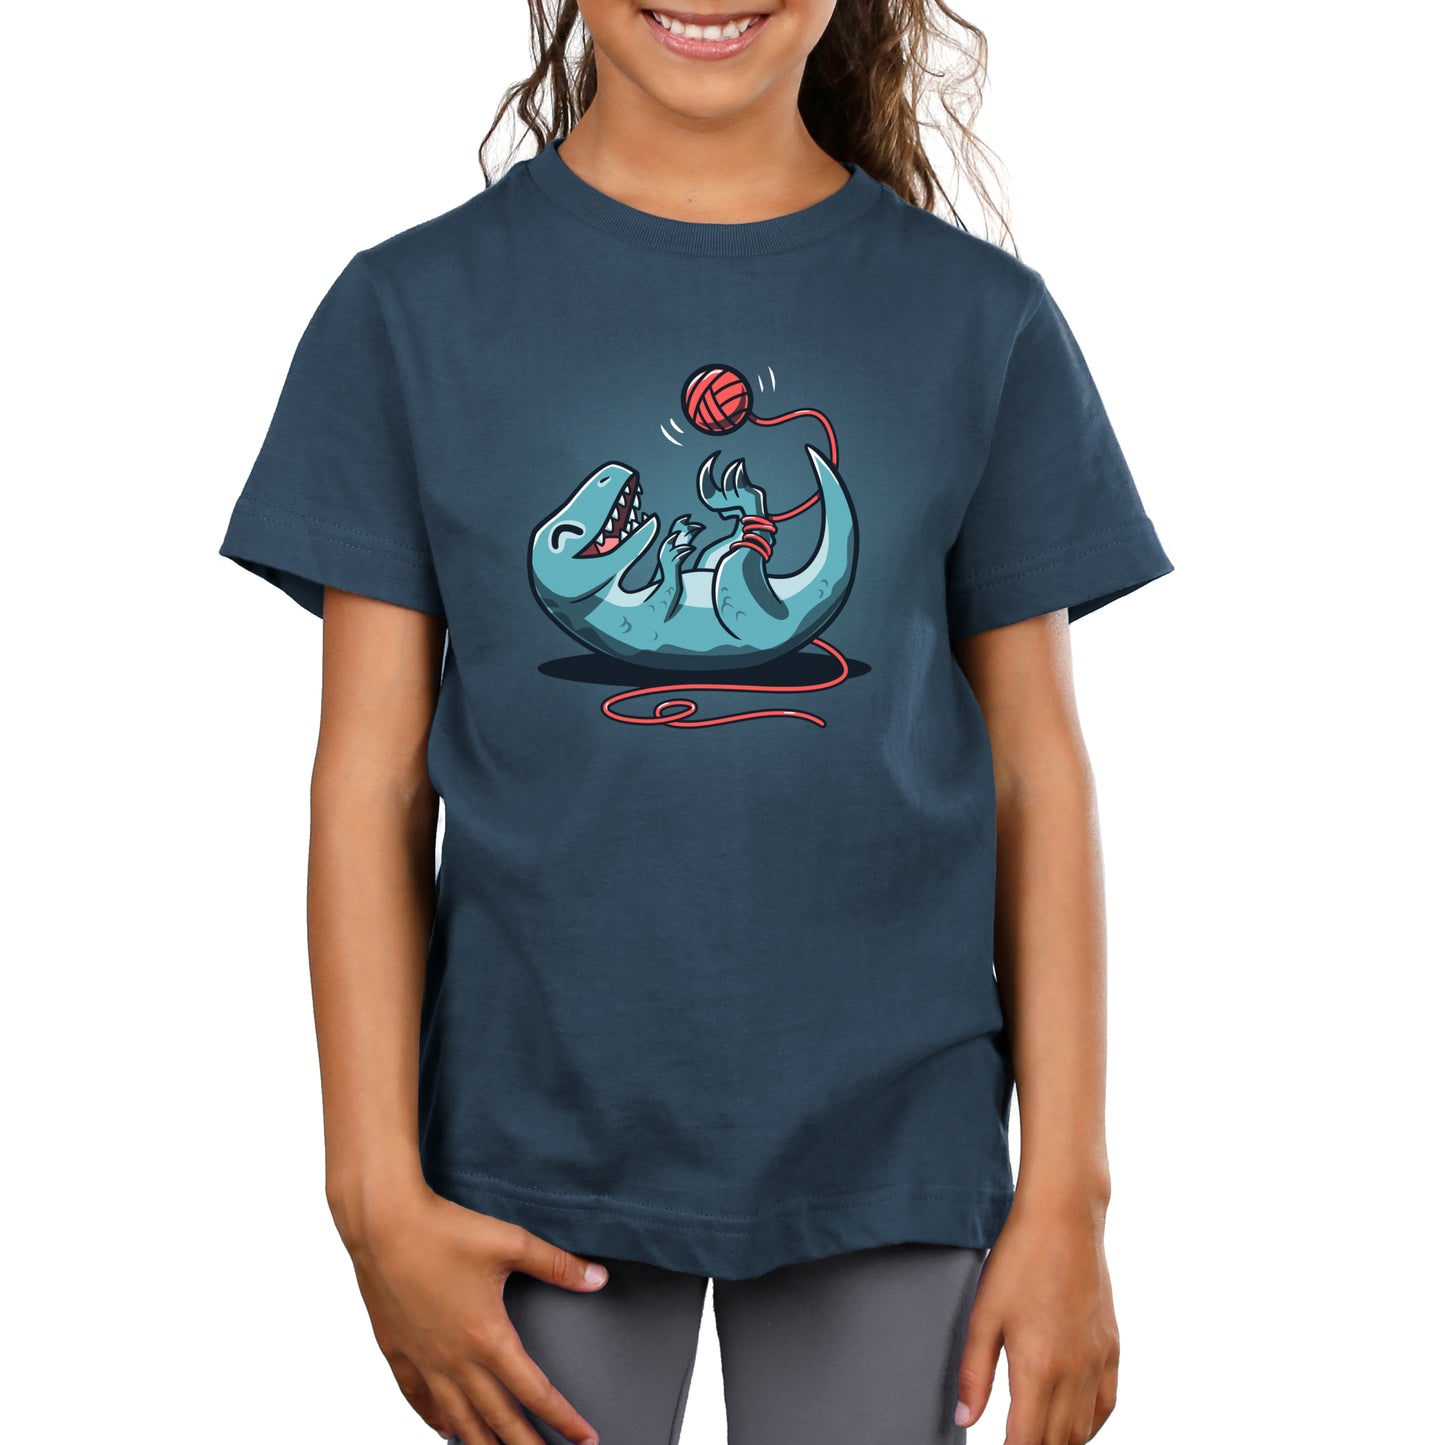 A girl wearing a TeeTurtle Velocikitty T-shirt with an image of a shark.